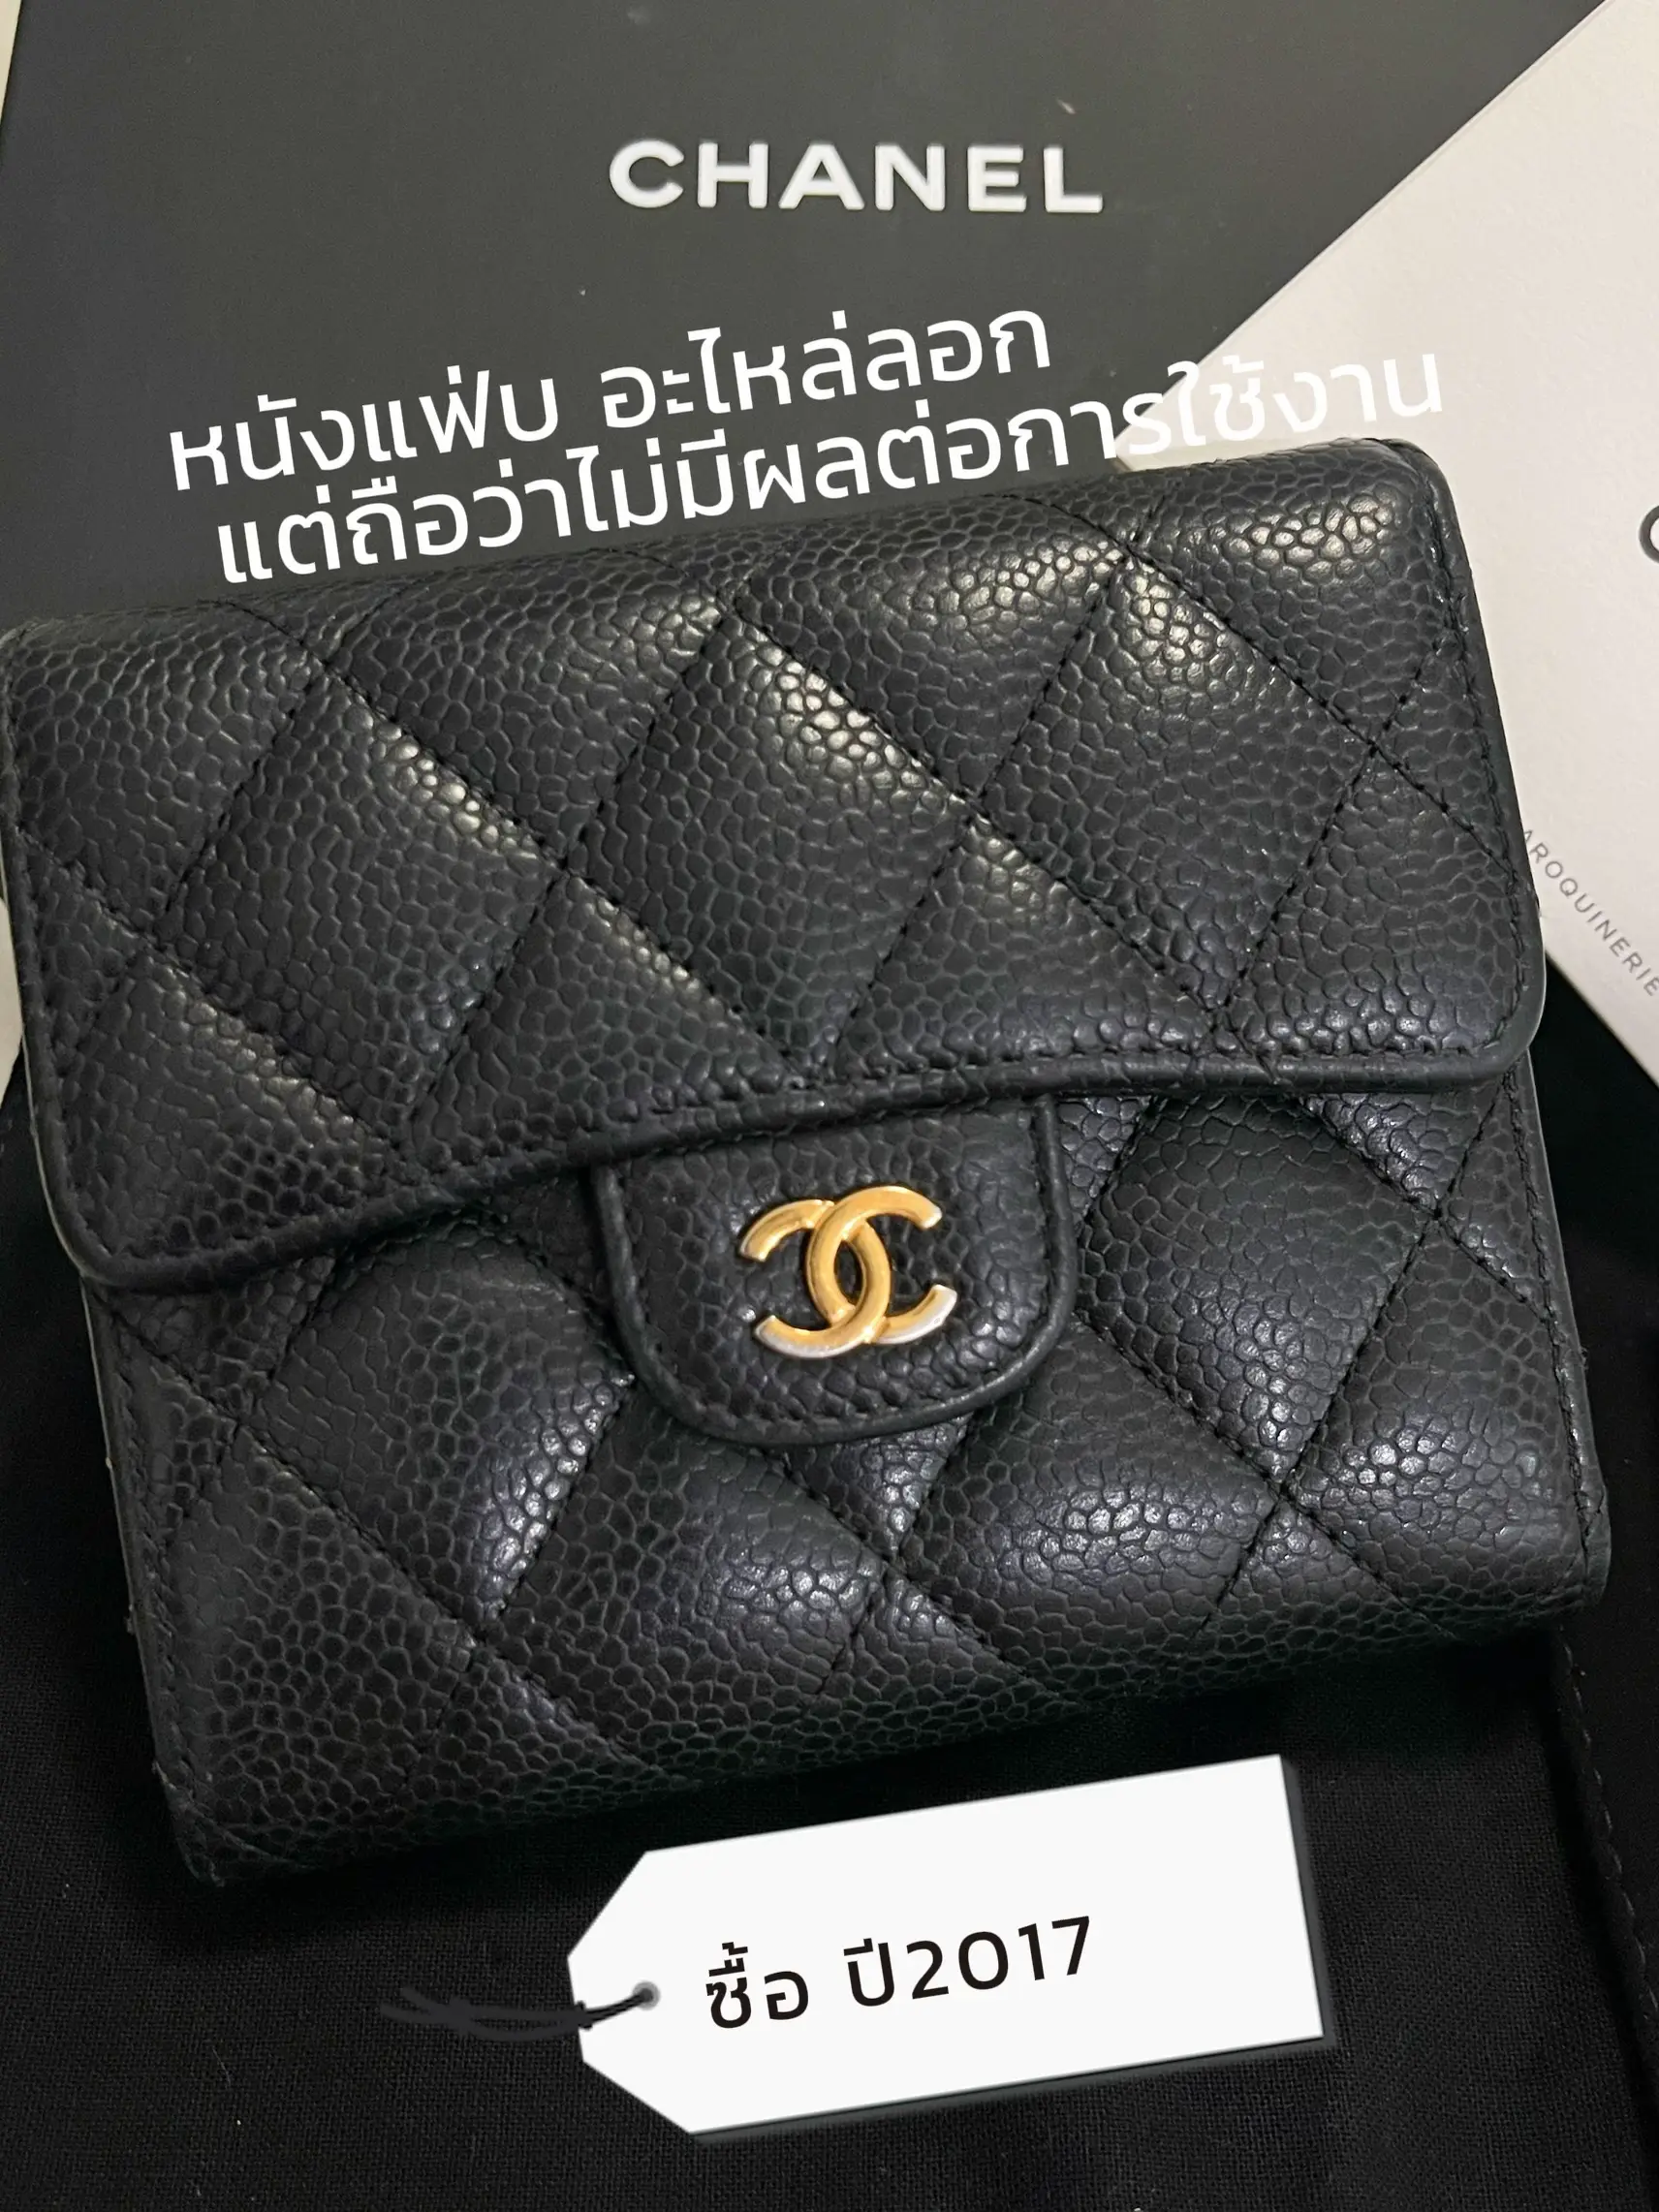 Review Chanel Value Purse, Gallery posted by Cnarinn